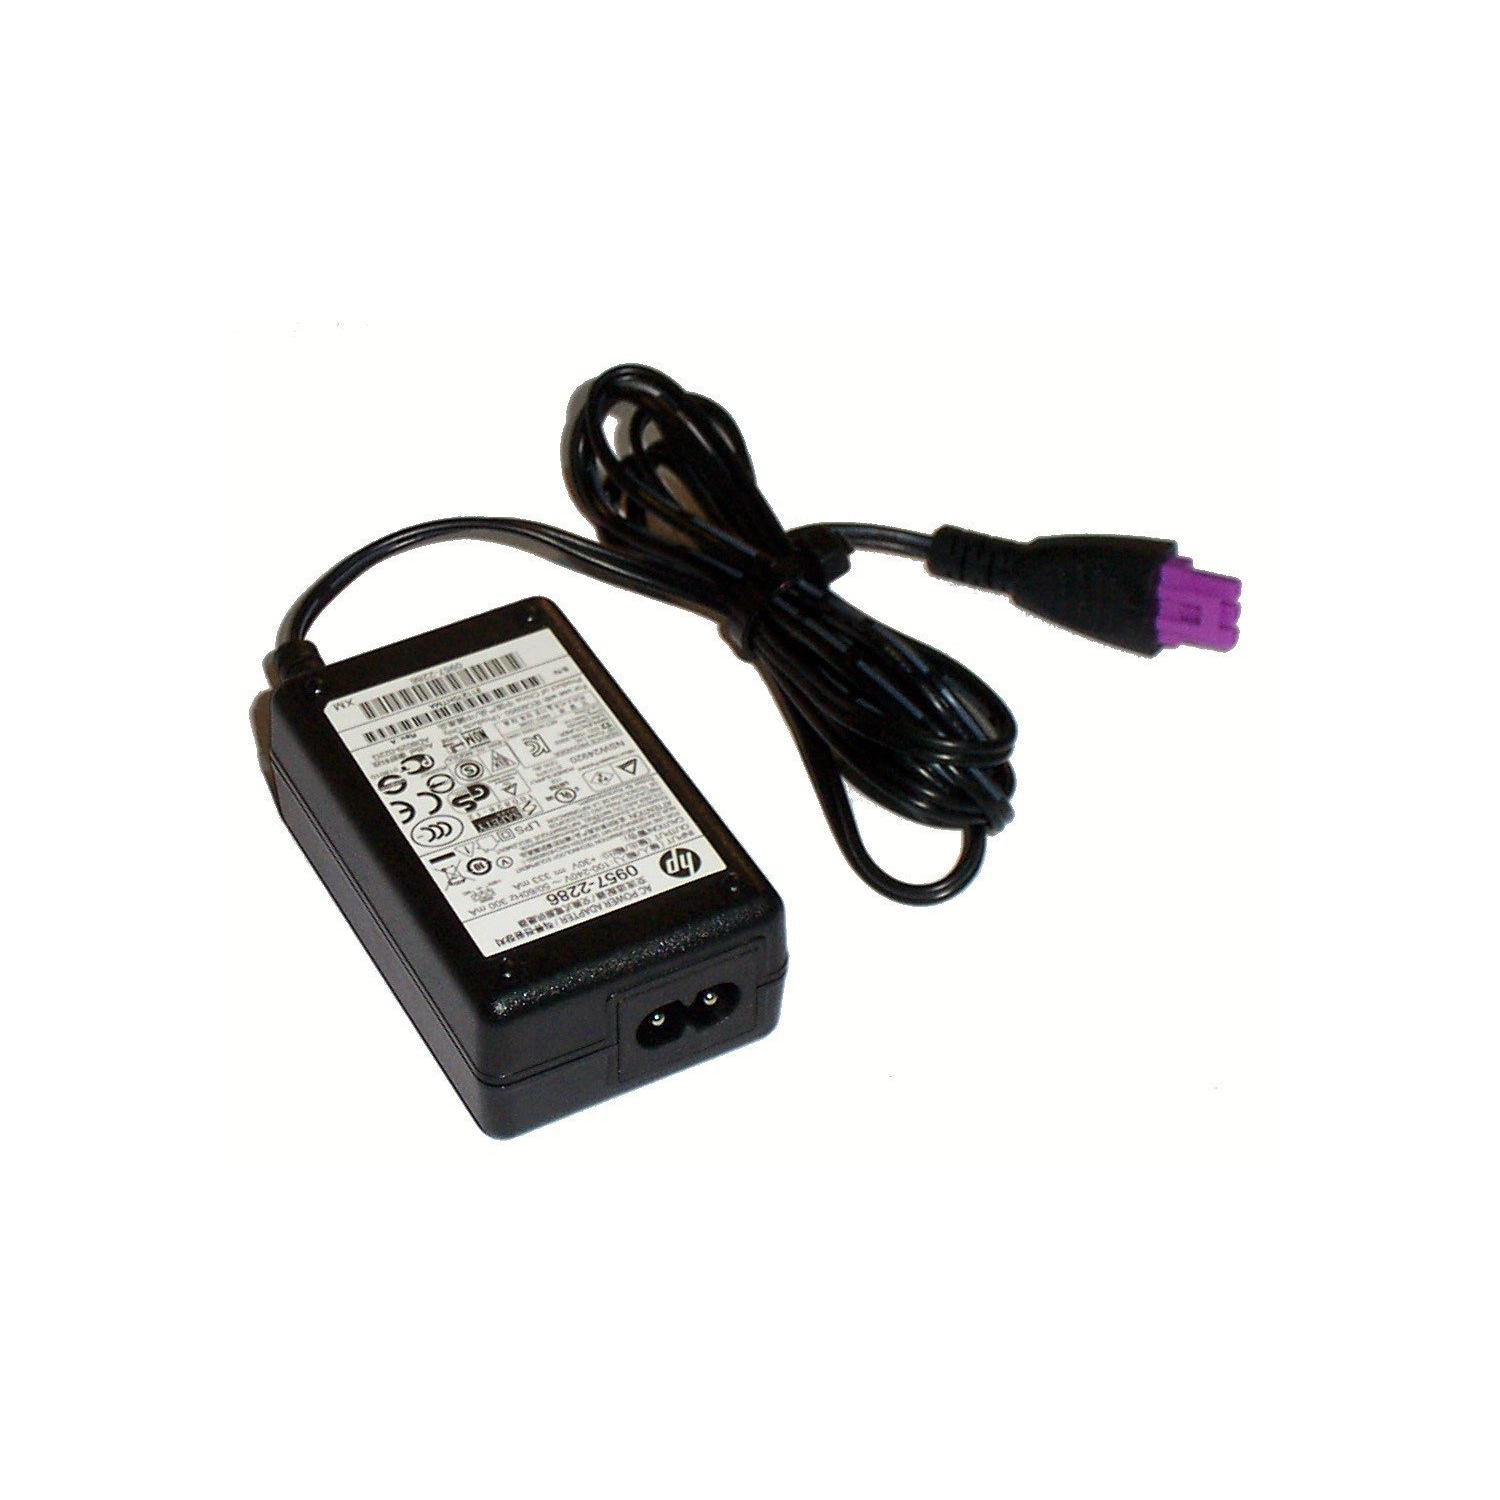 New Genuine HP Deskjet 3055A 3056A 3510 3511 3512 Printer AC Power Supply Adapter Charger 10W